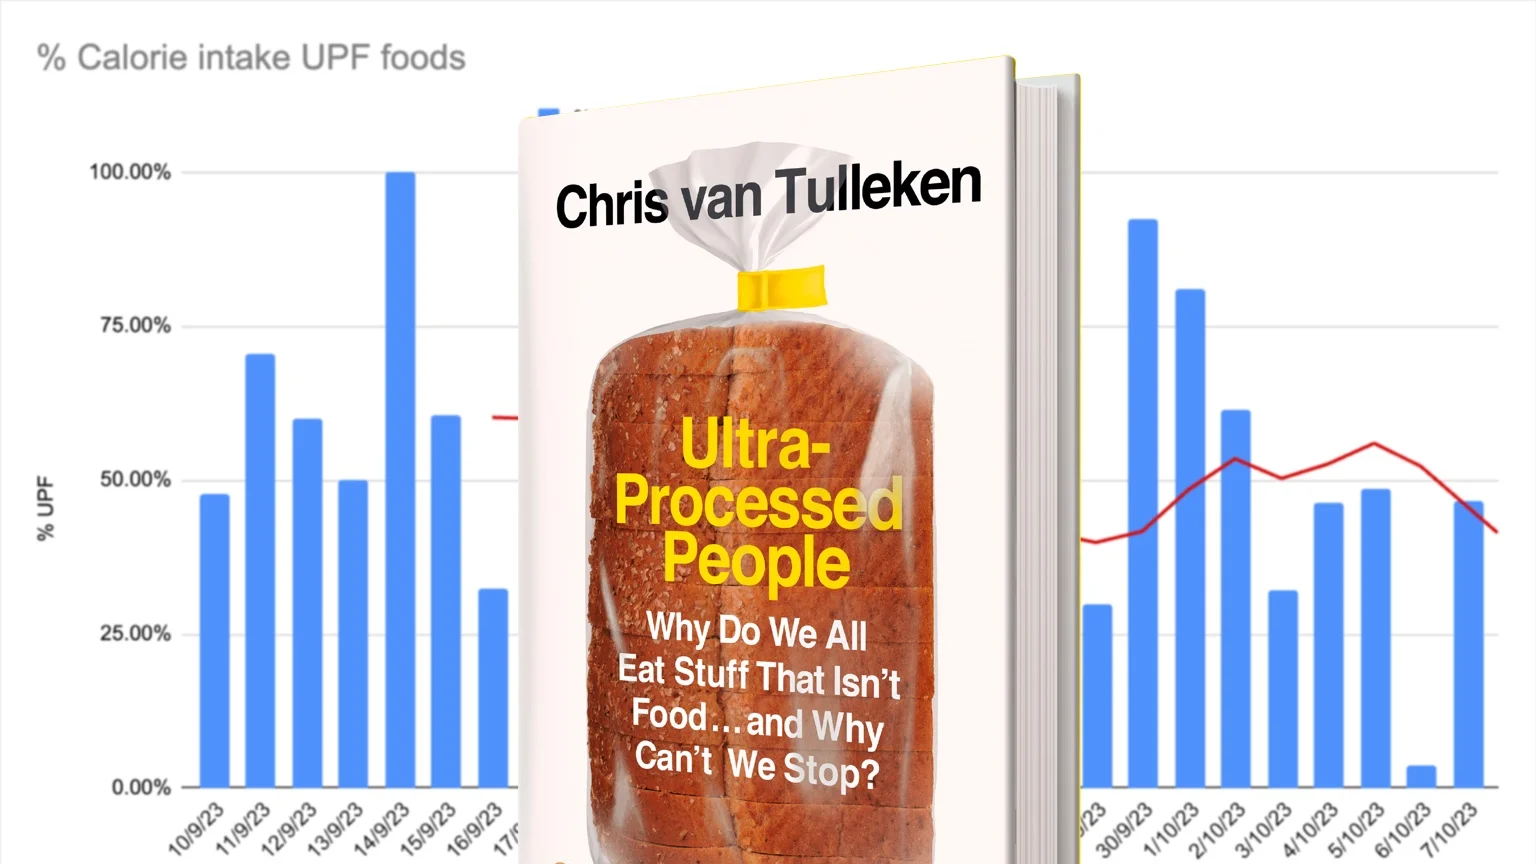 Ultra-Processed People is a book about ultra-processed foods